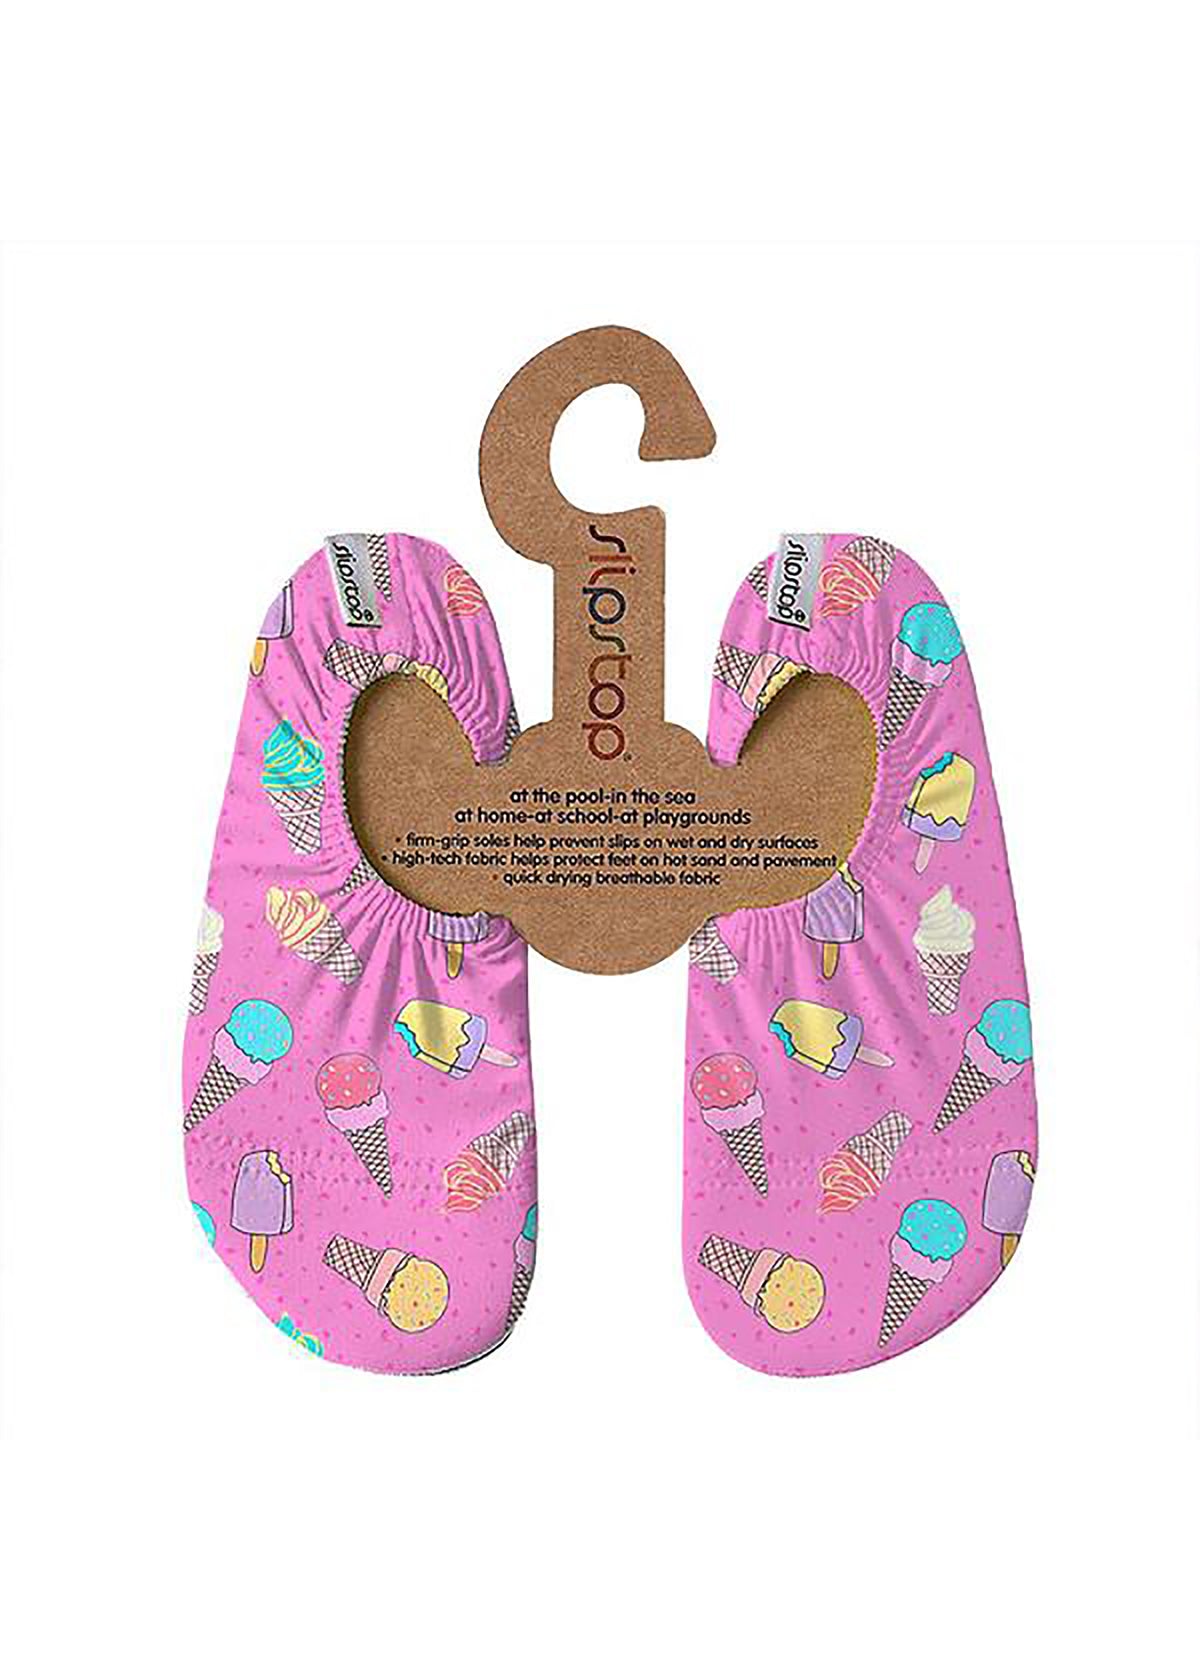 Children's slippers - Glace, ice cream on a pink base